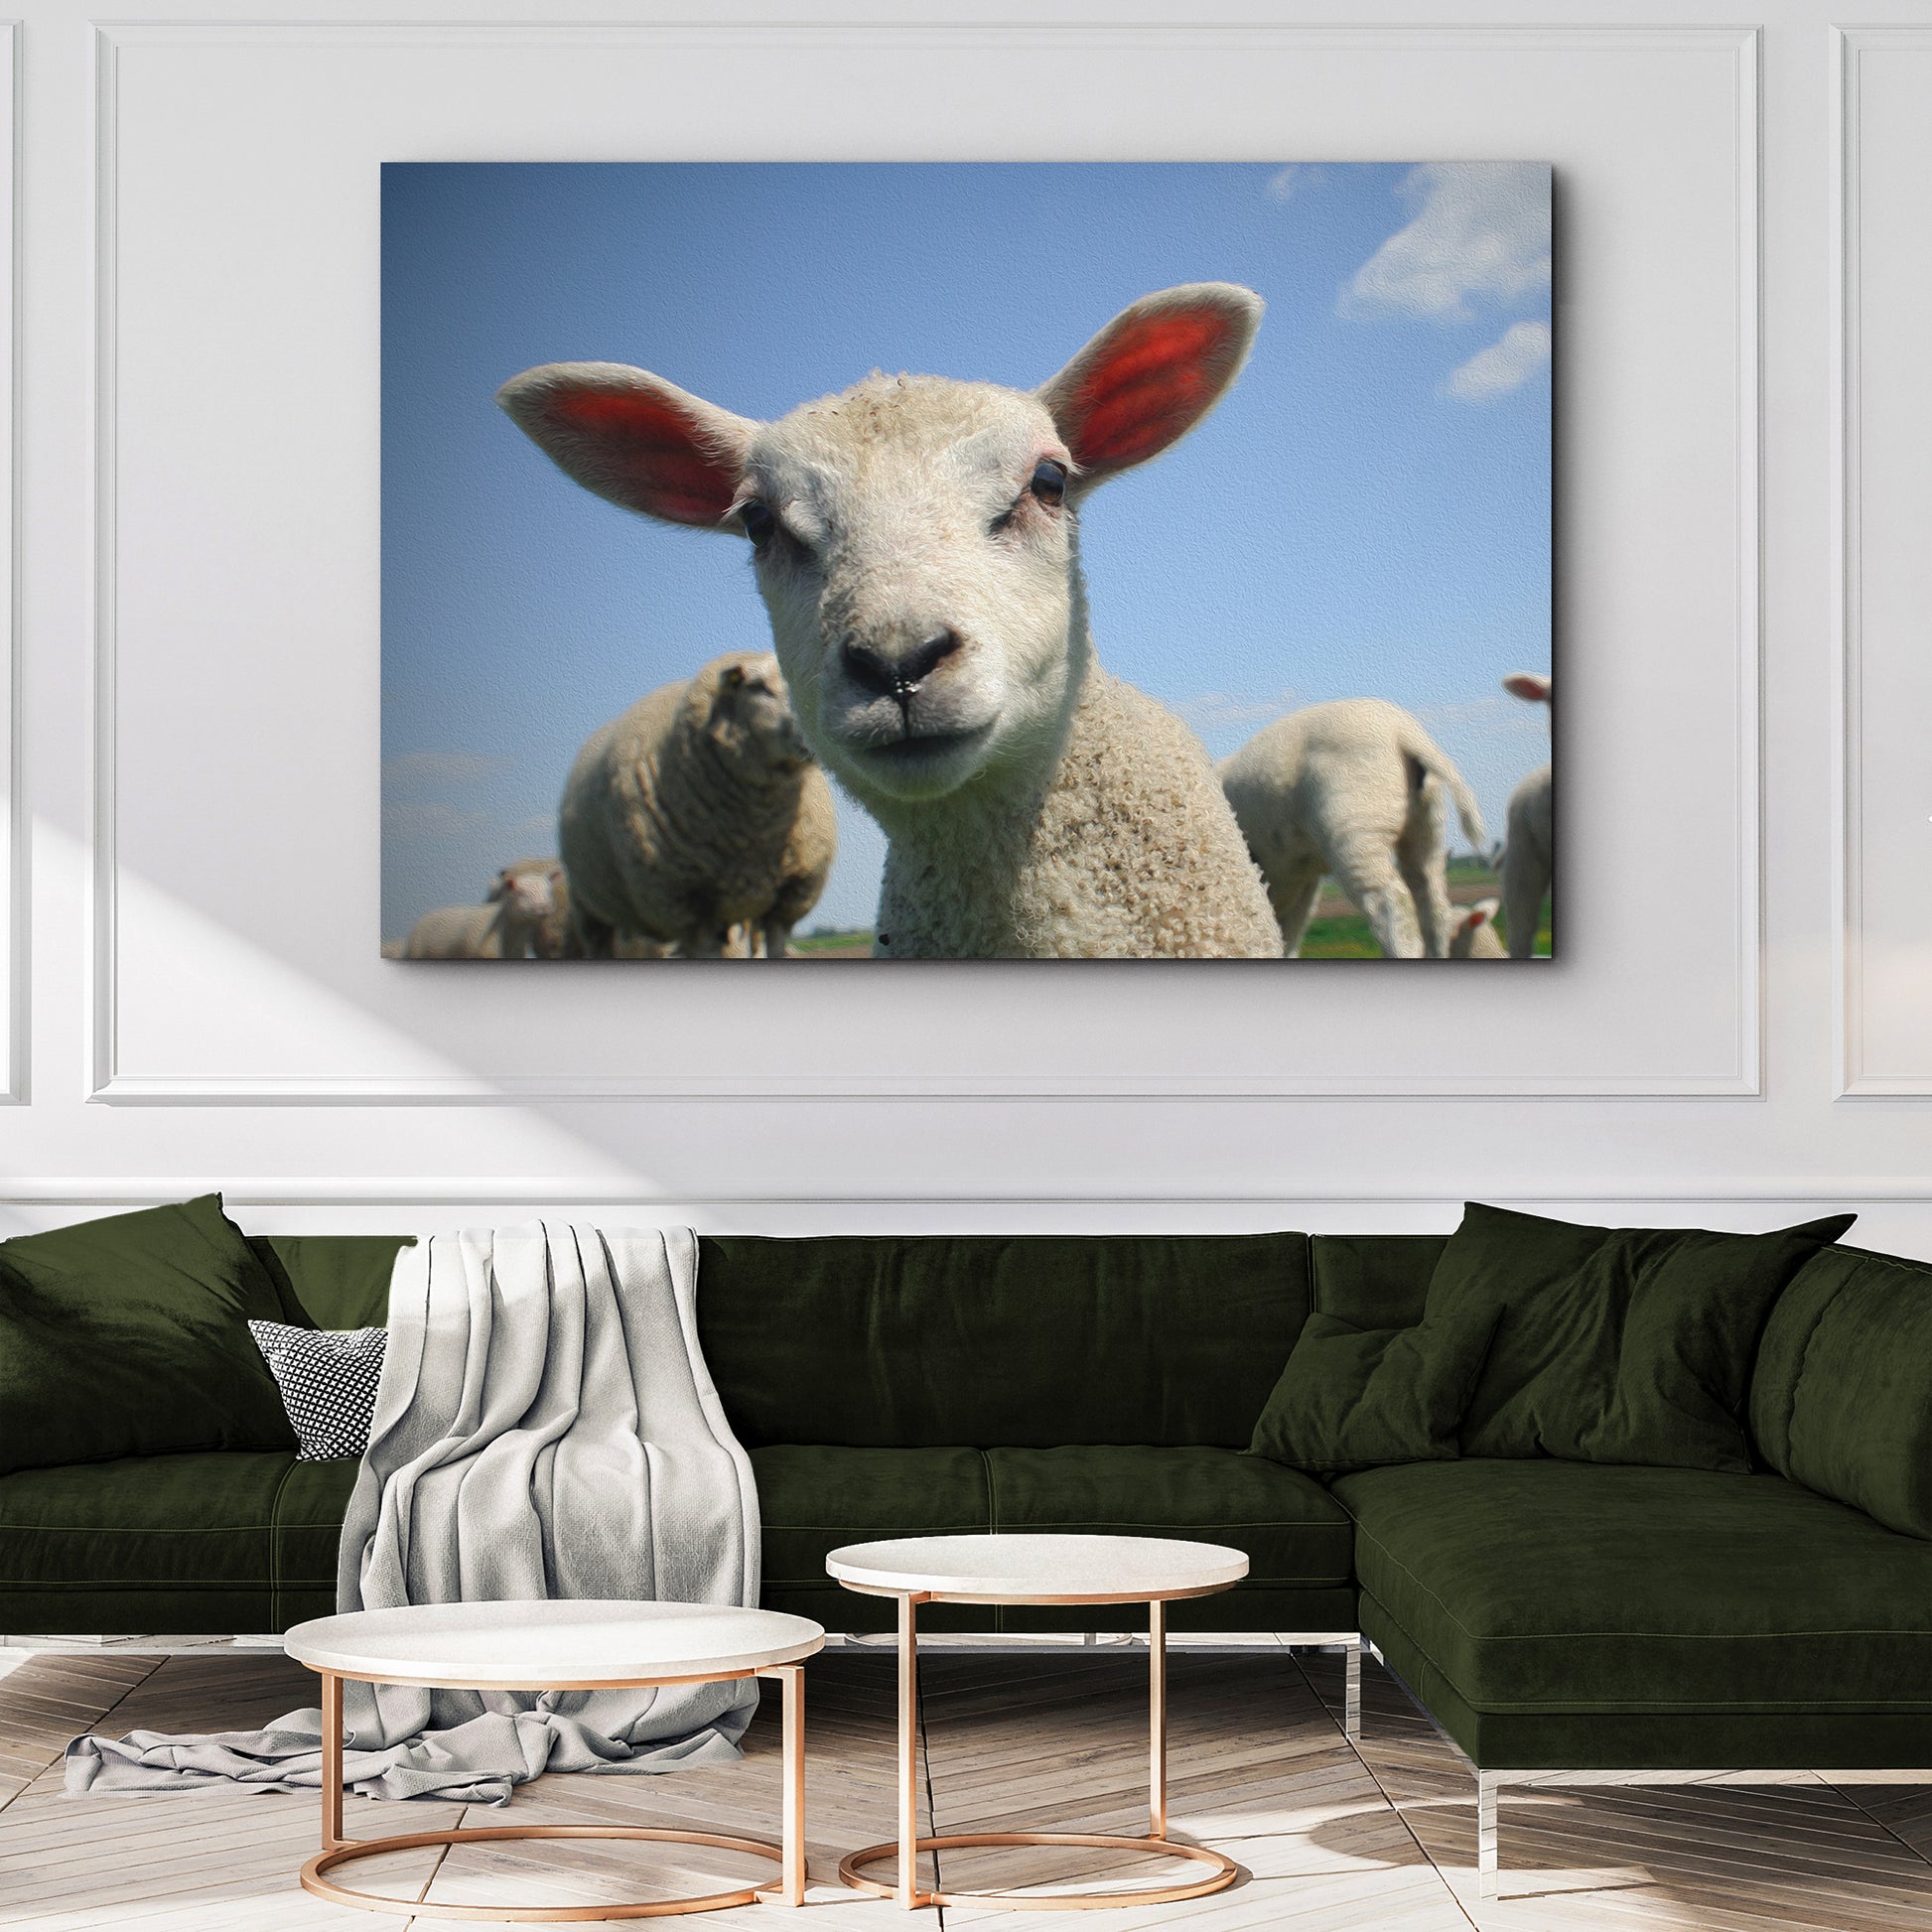 Curious Lamb Canvas Wall Art Style 2 - Image by Tailored Canvases